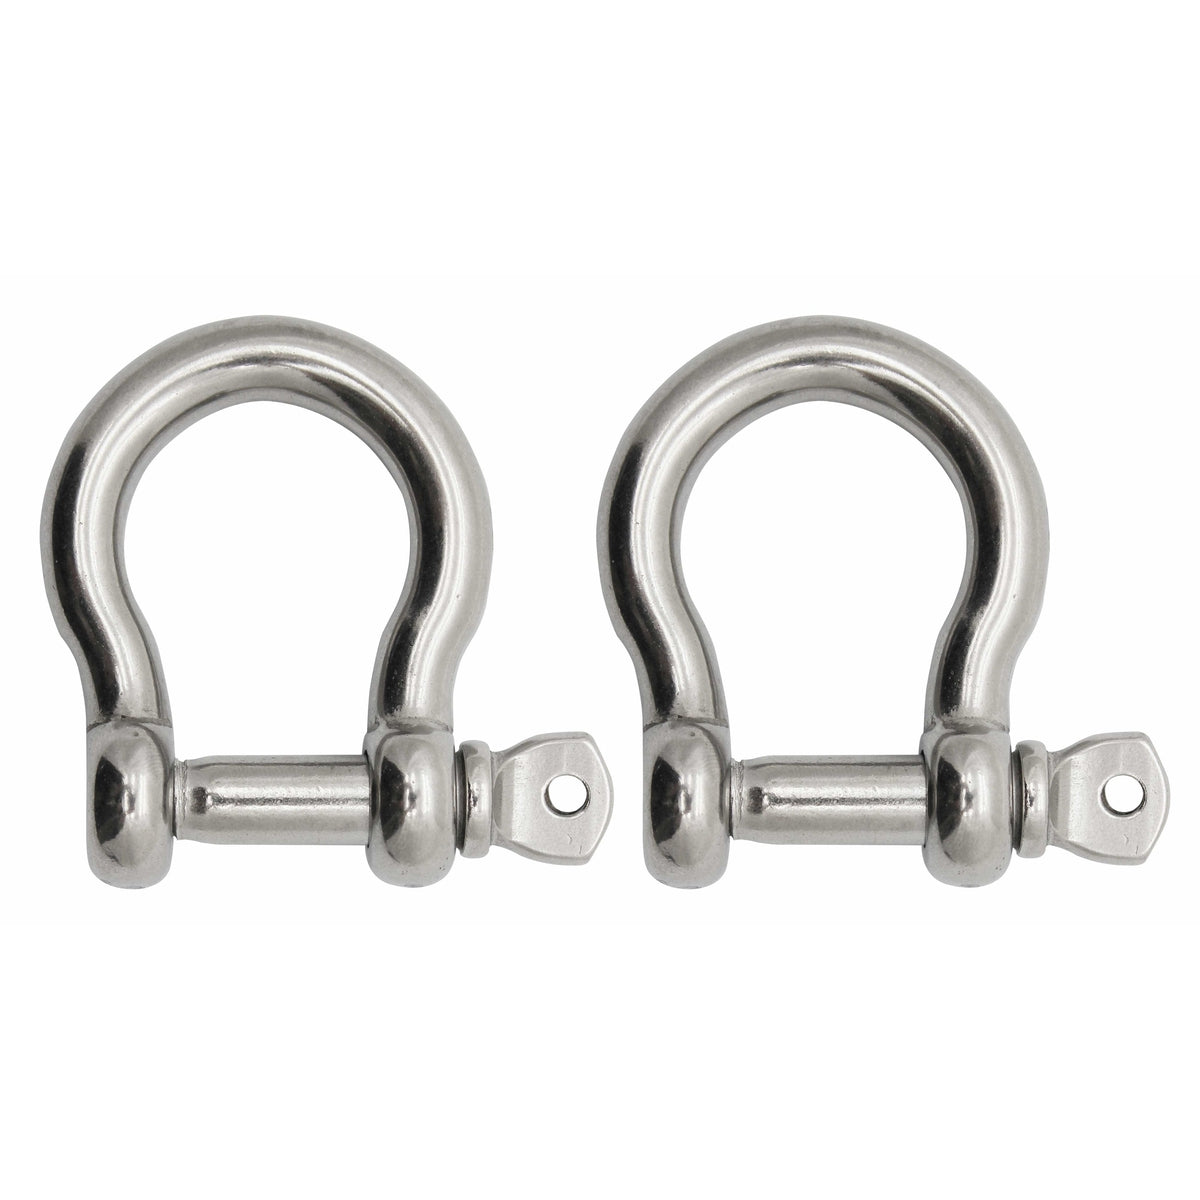 Extreme Max BoatTector SS Bow Shackle 3/4" 2-pk #3006.8303.2